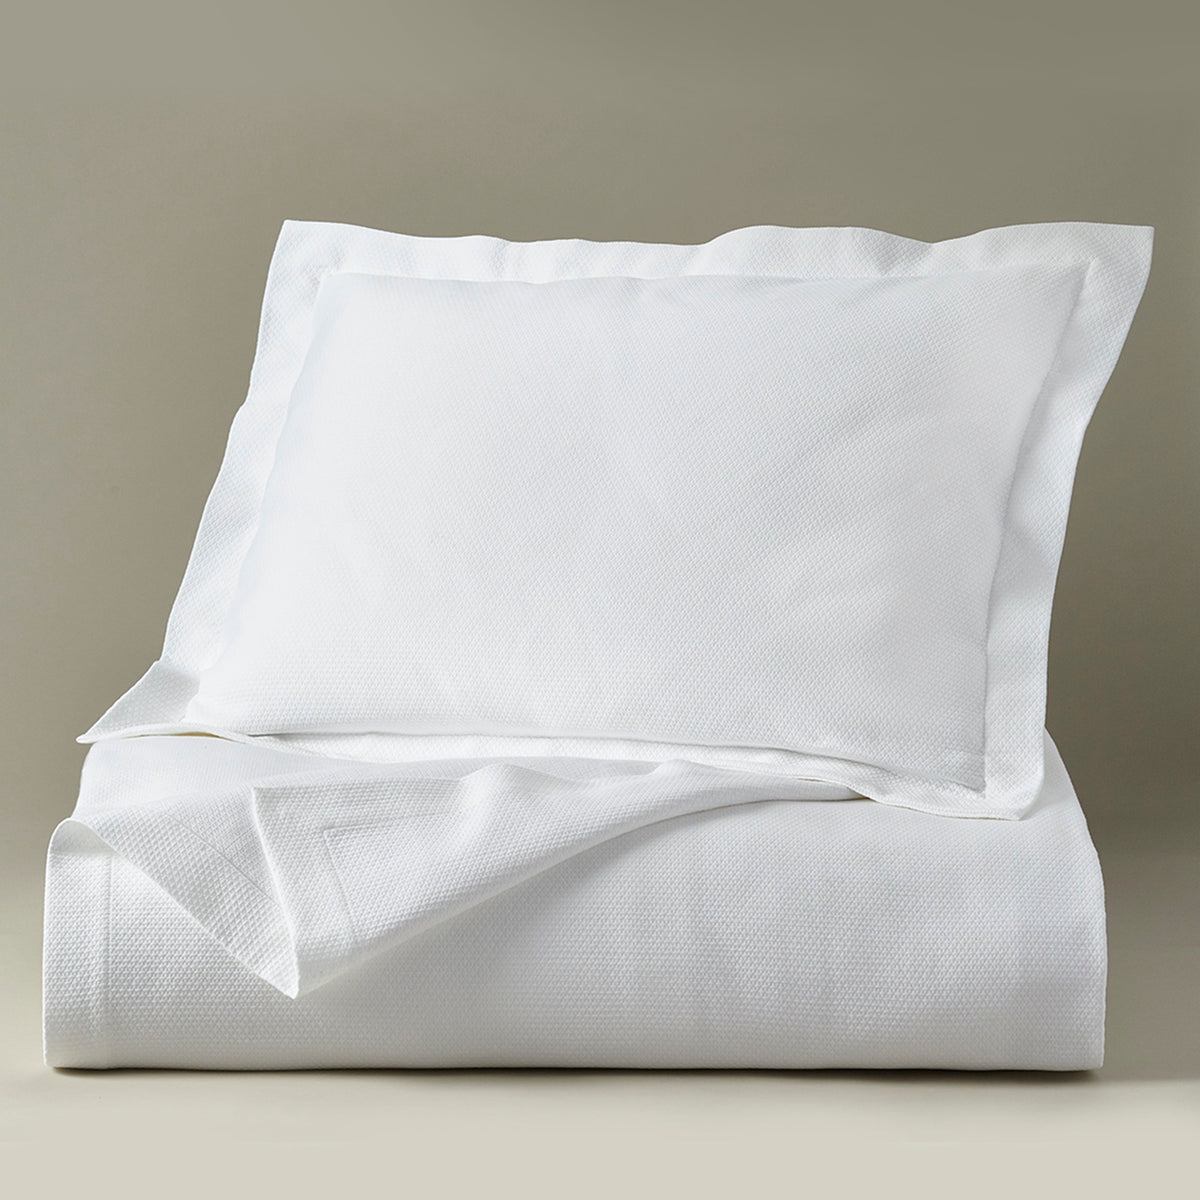 Lifestyle Image of Downtown-Company Paige Coverlets and Shams in White Color